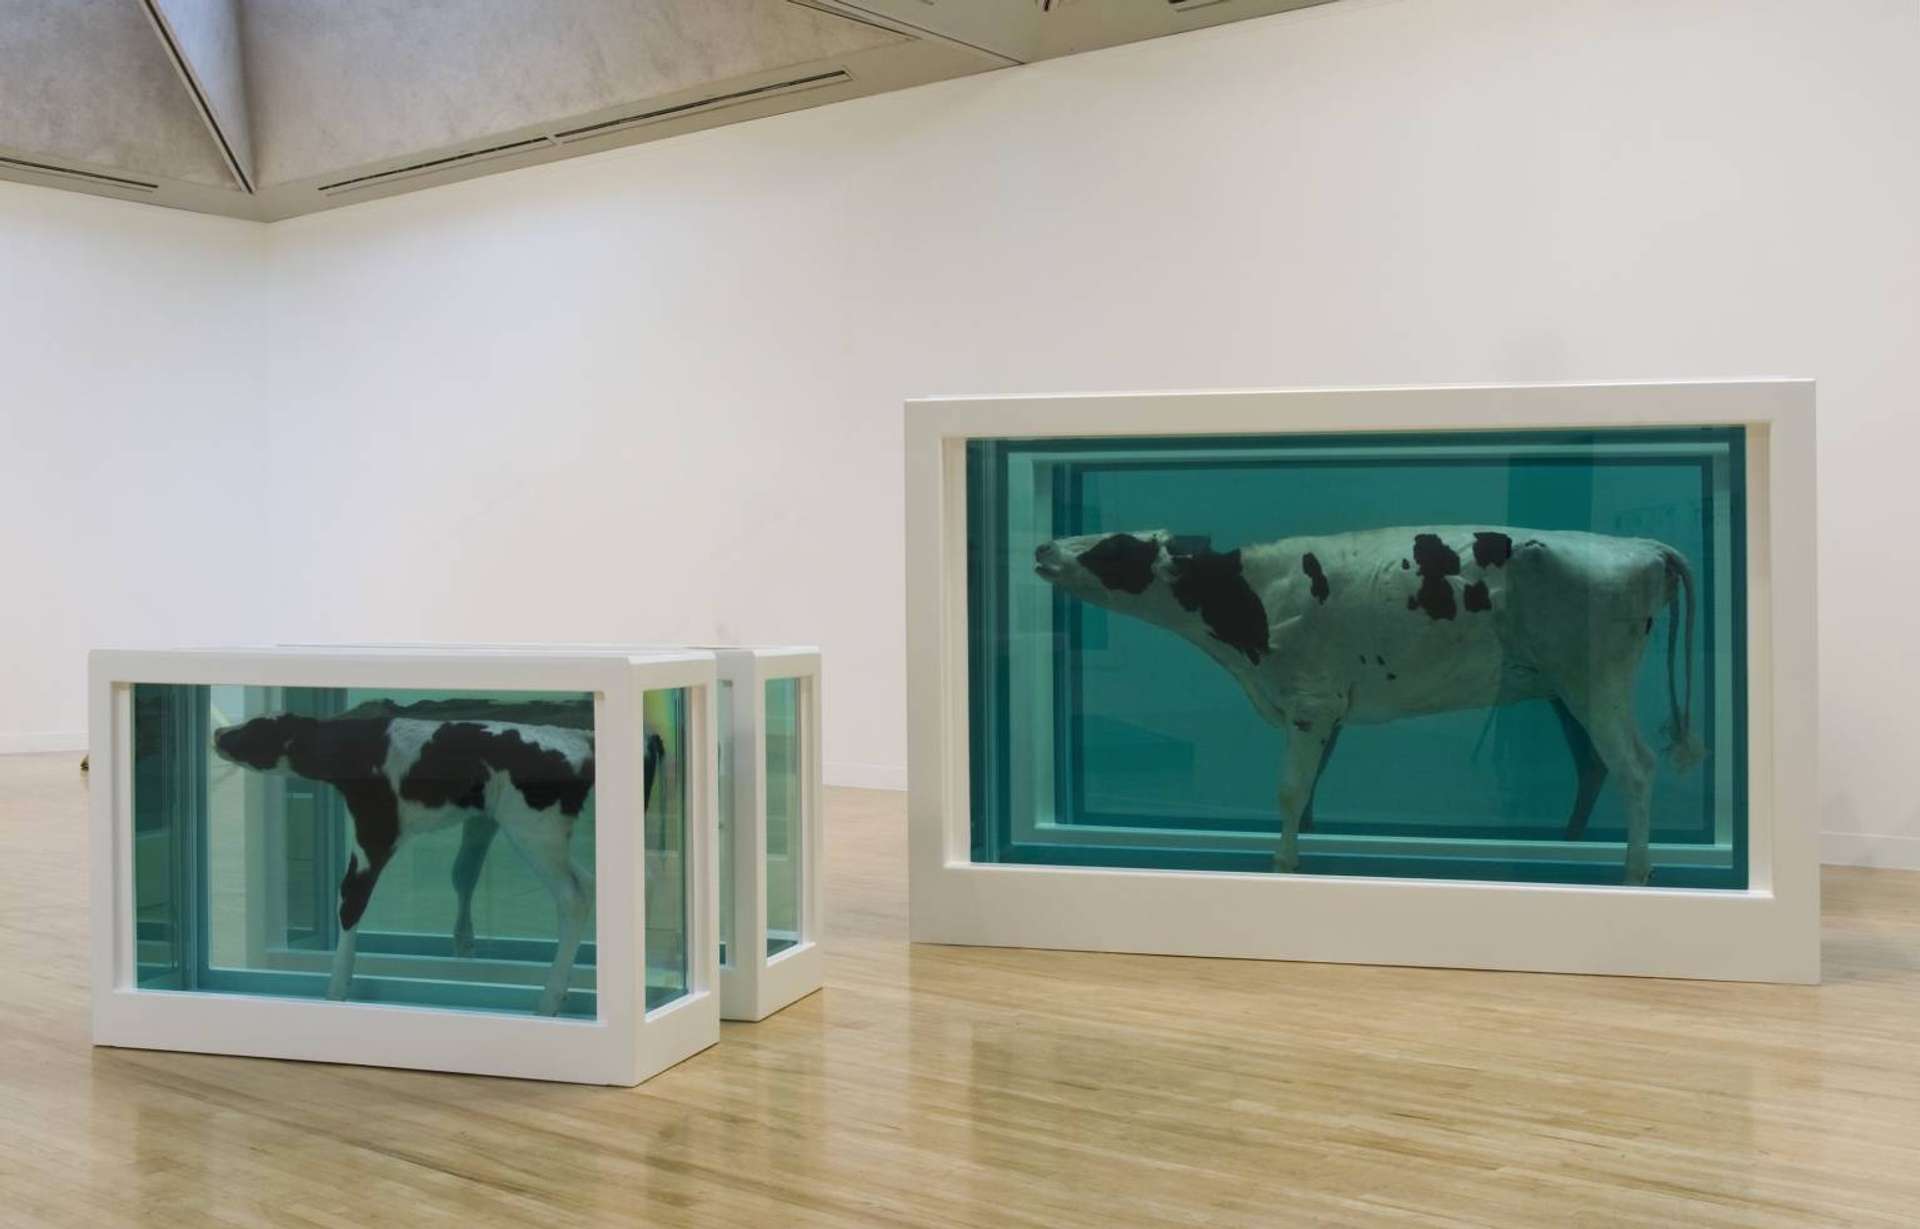 Exhibition of two sculptures containing one half of a cow and two sculptures with one half of her calf